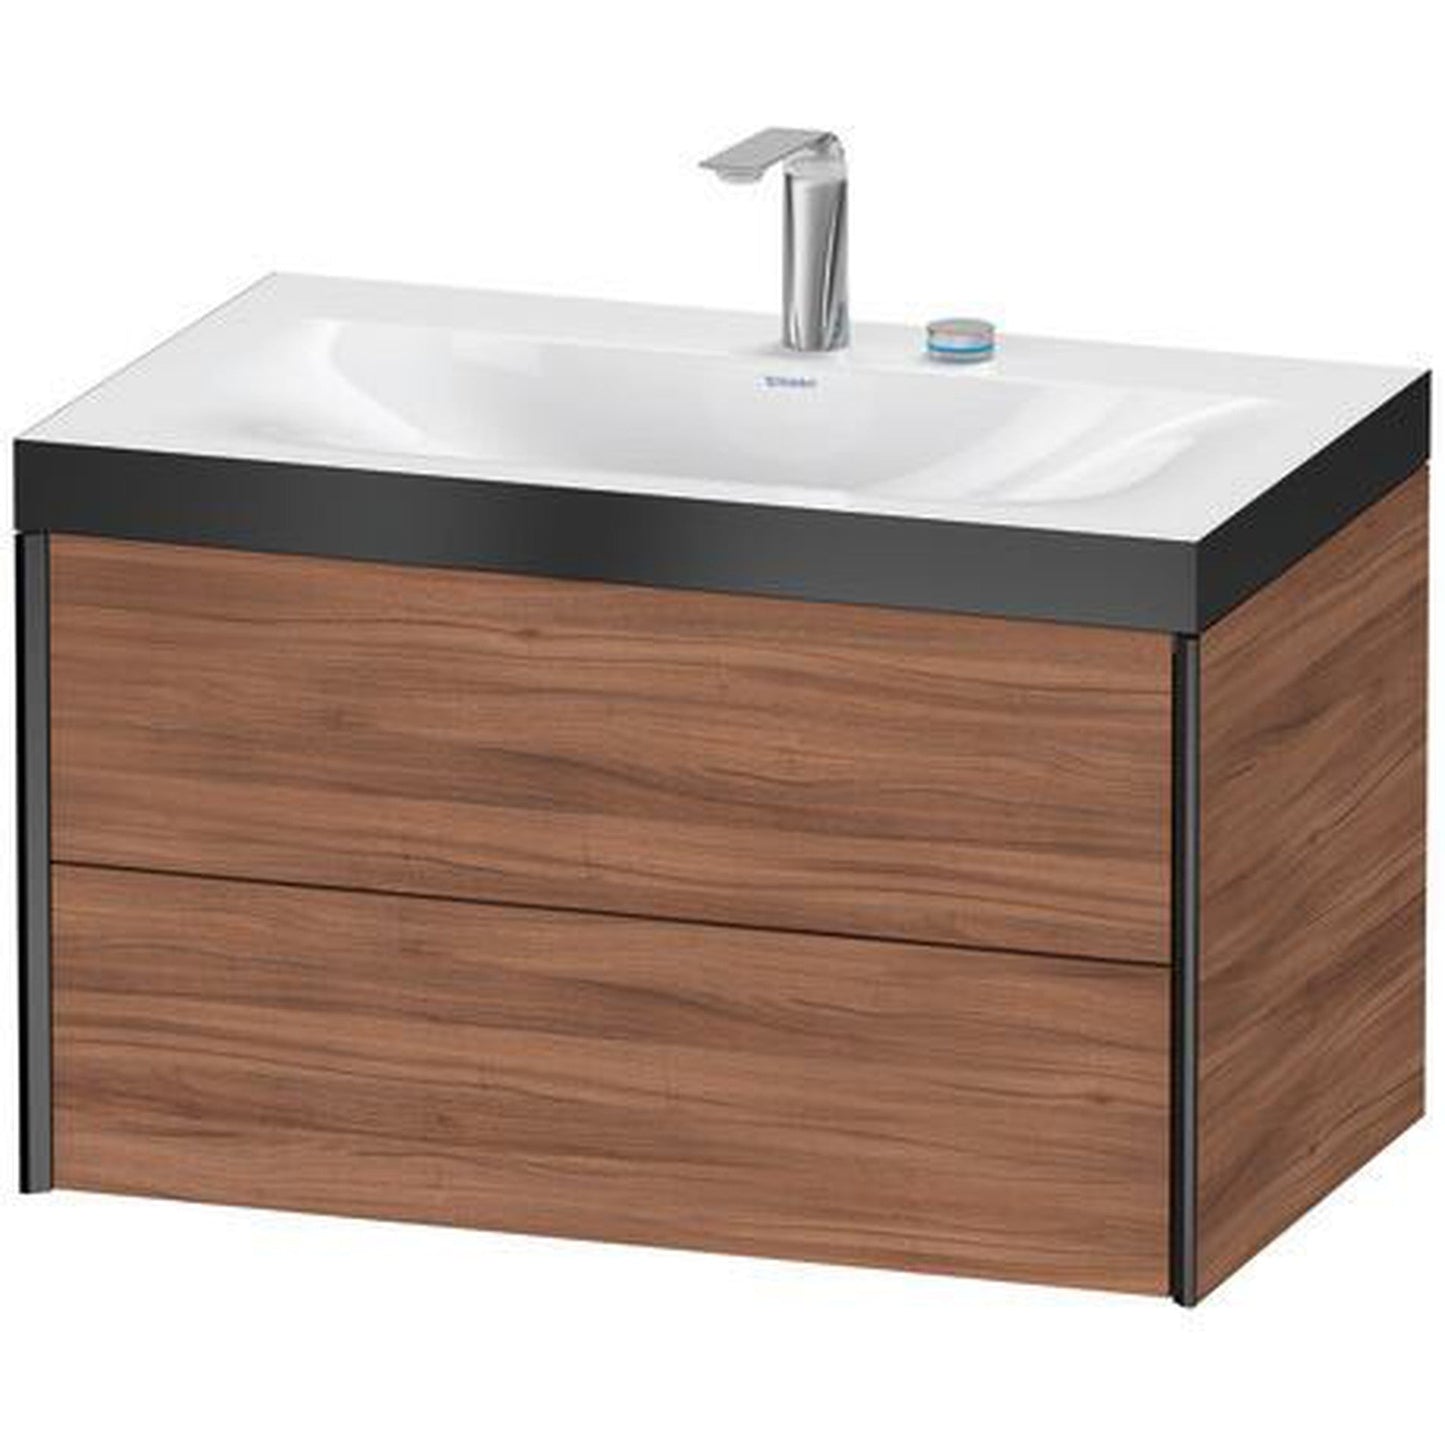 Duravit Xviu 31" x 20" x 19" Two Drawer C-Bonded Wall-Mount Vanity Kit With Two Tap Holes, Walnut (XV4615EB279P)